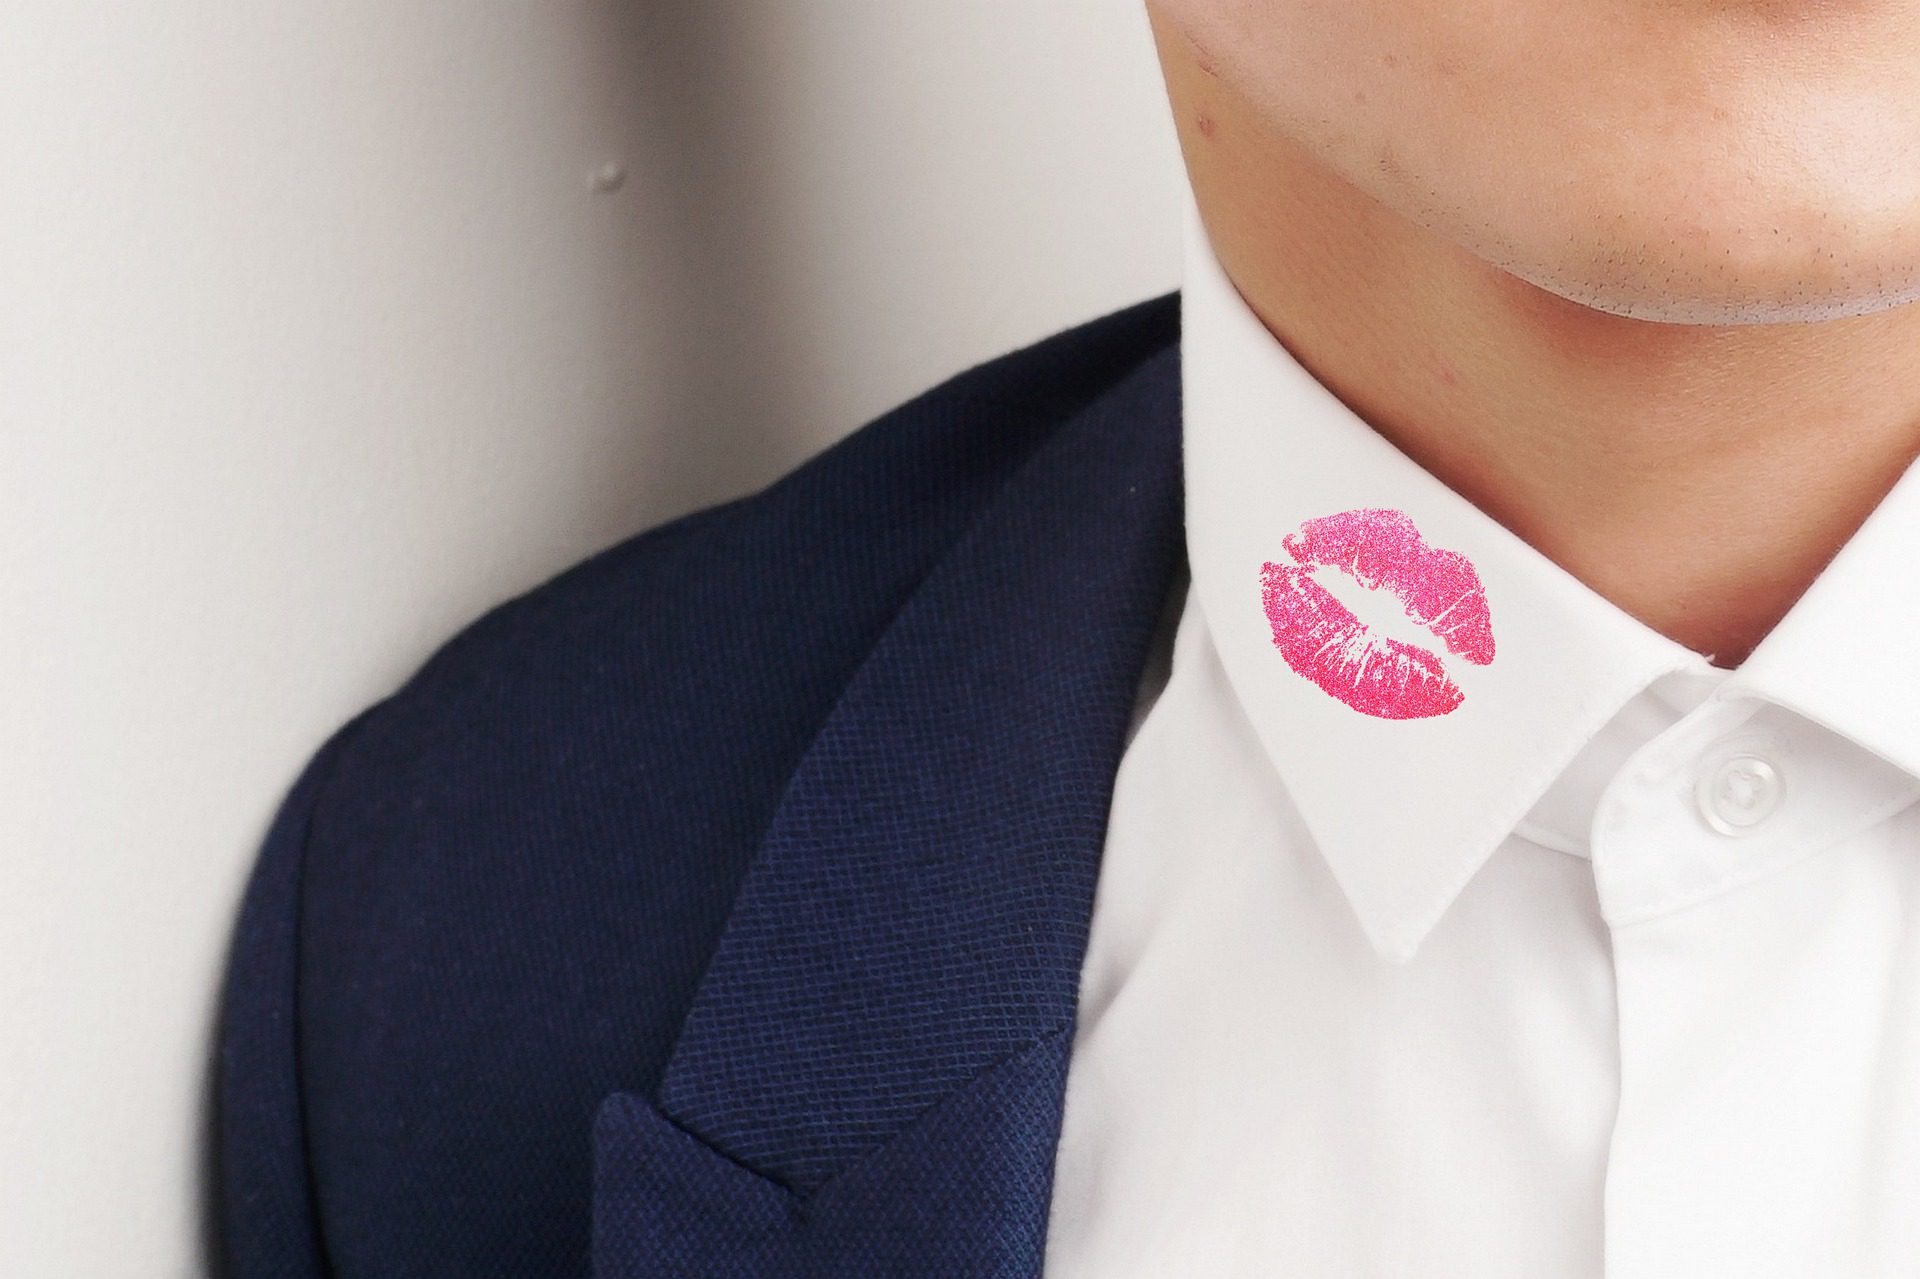 Man with a lipstick mark on his collar.